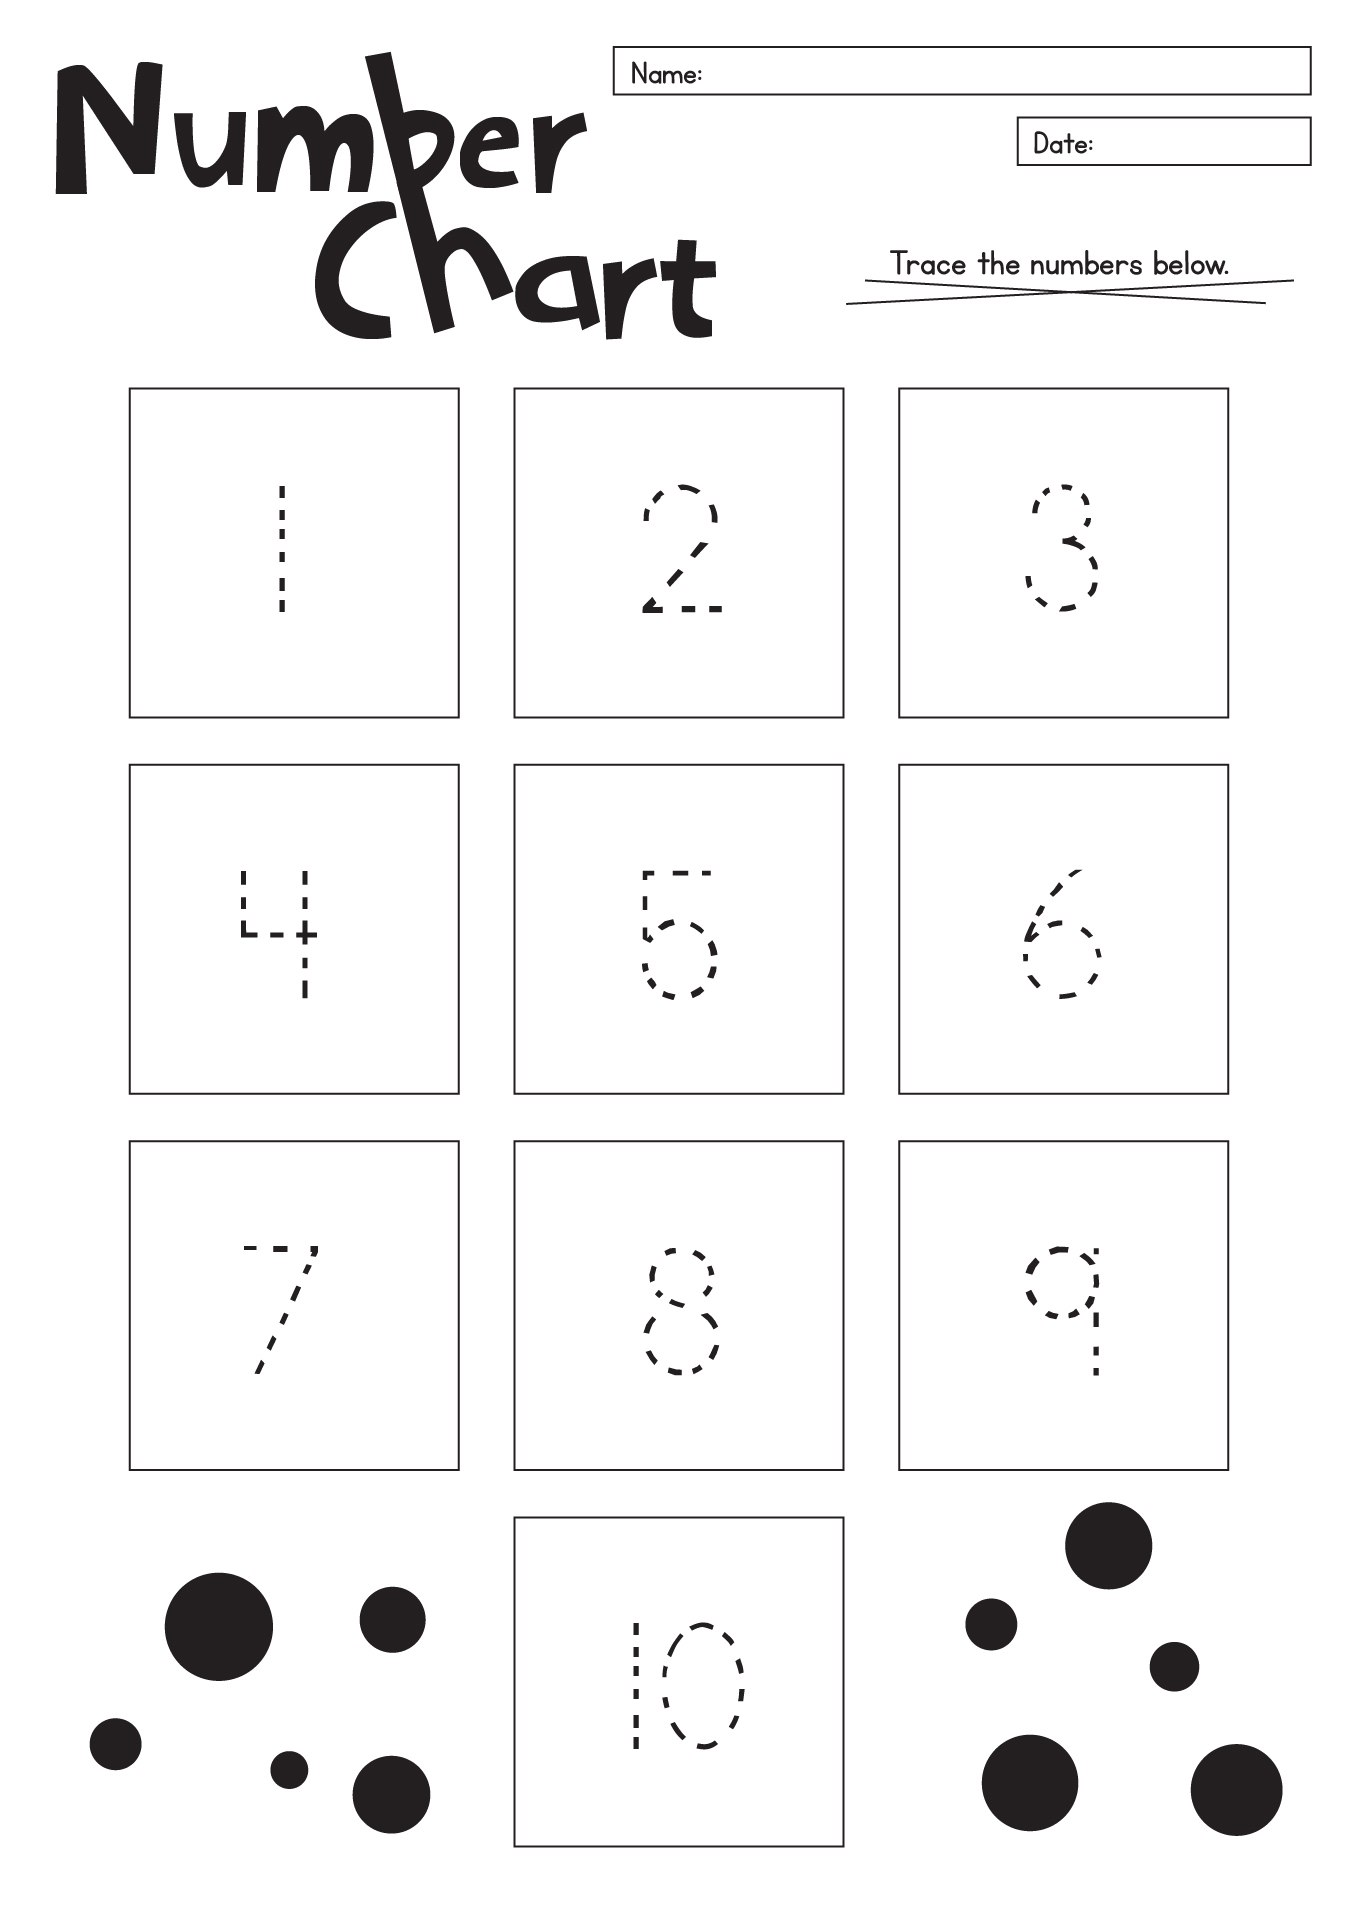 12 Best Images Of Math Worksheets Missing Numbers 1 20 Missing Number